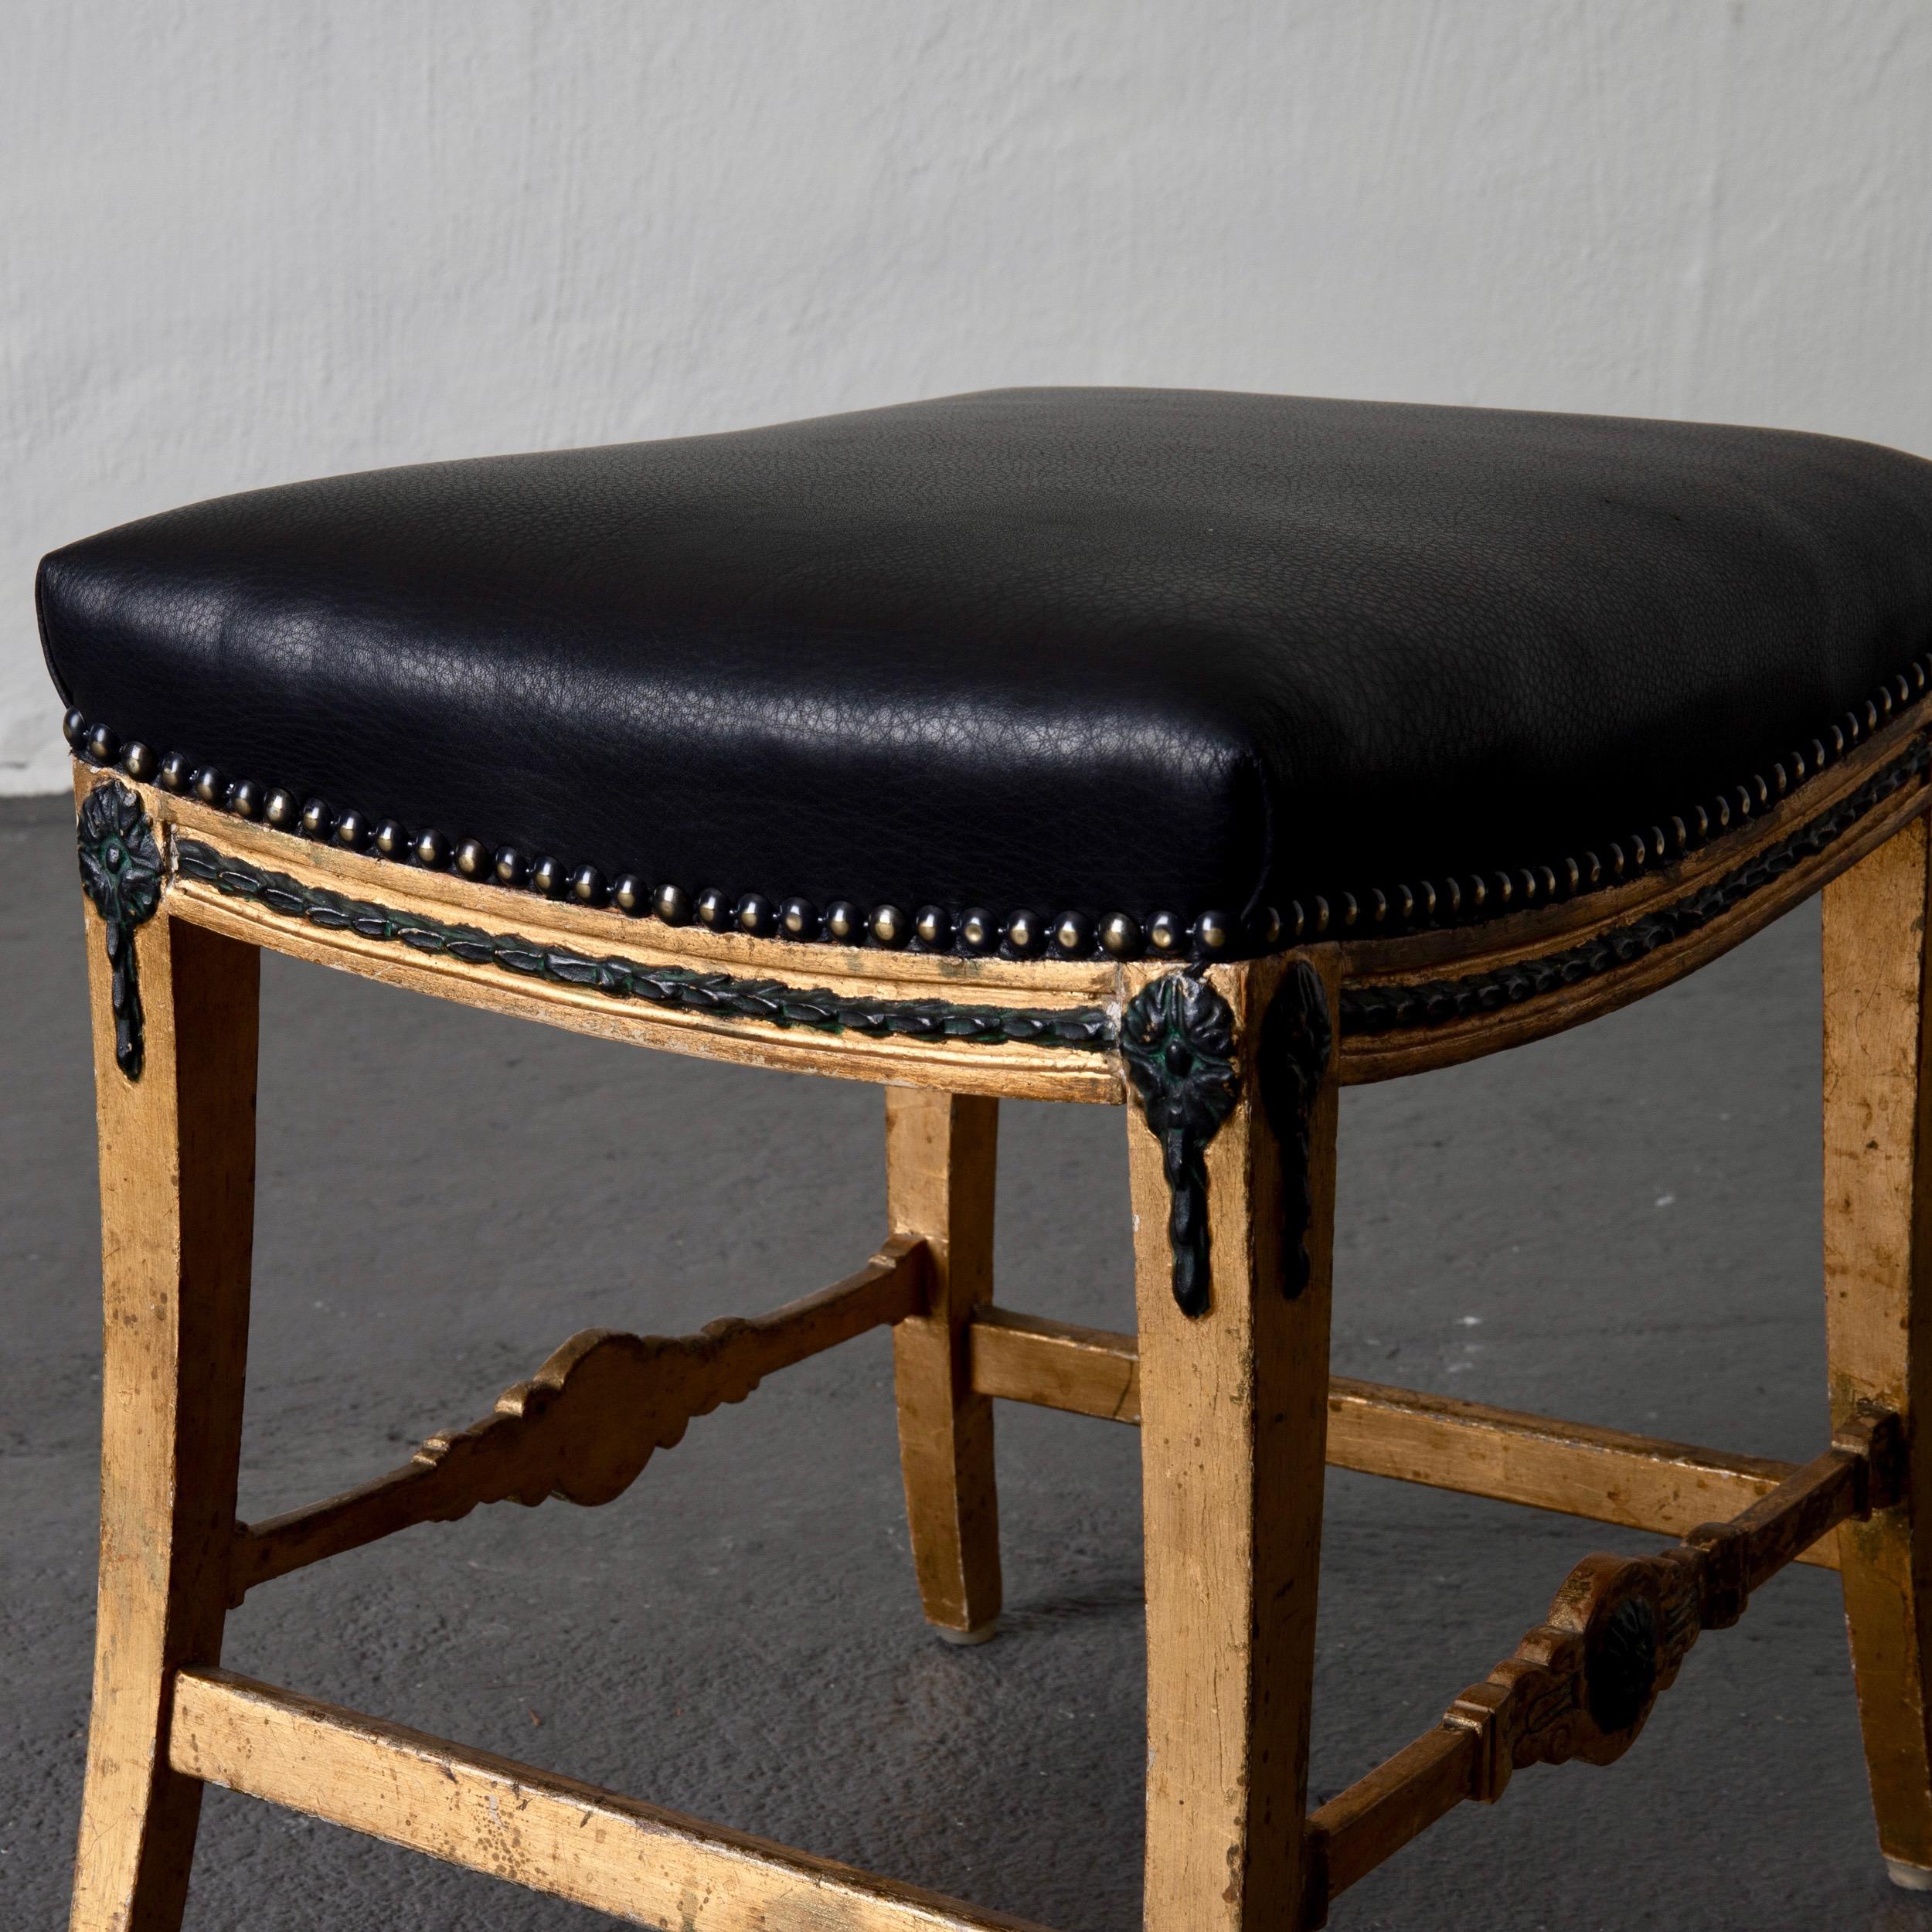 Stool Bench Swedish Neoclassical 18th Century Gilded Black Leather Sweden 3